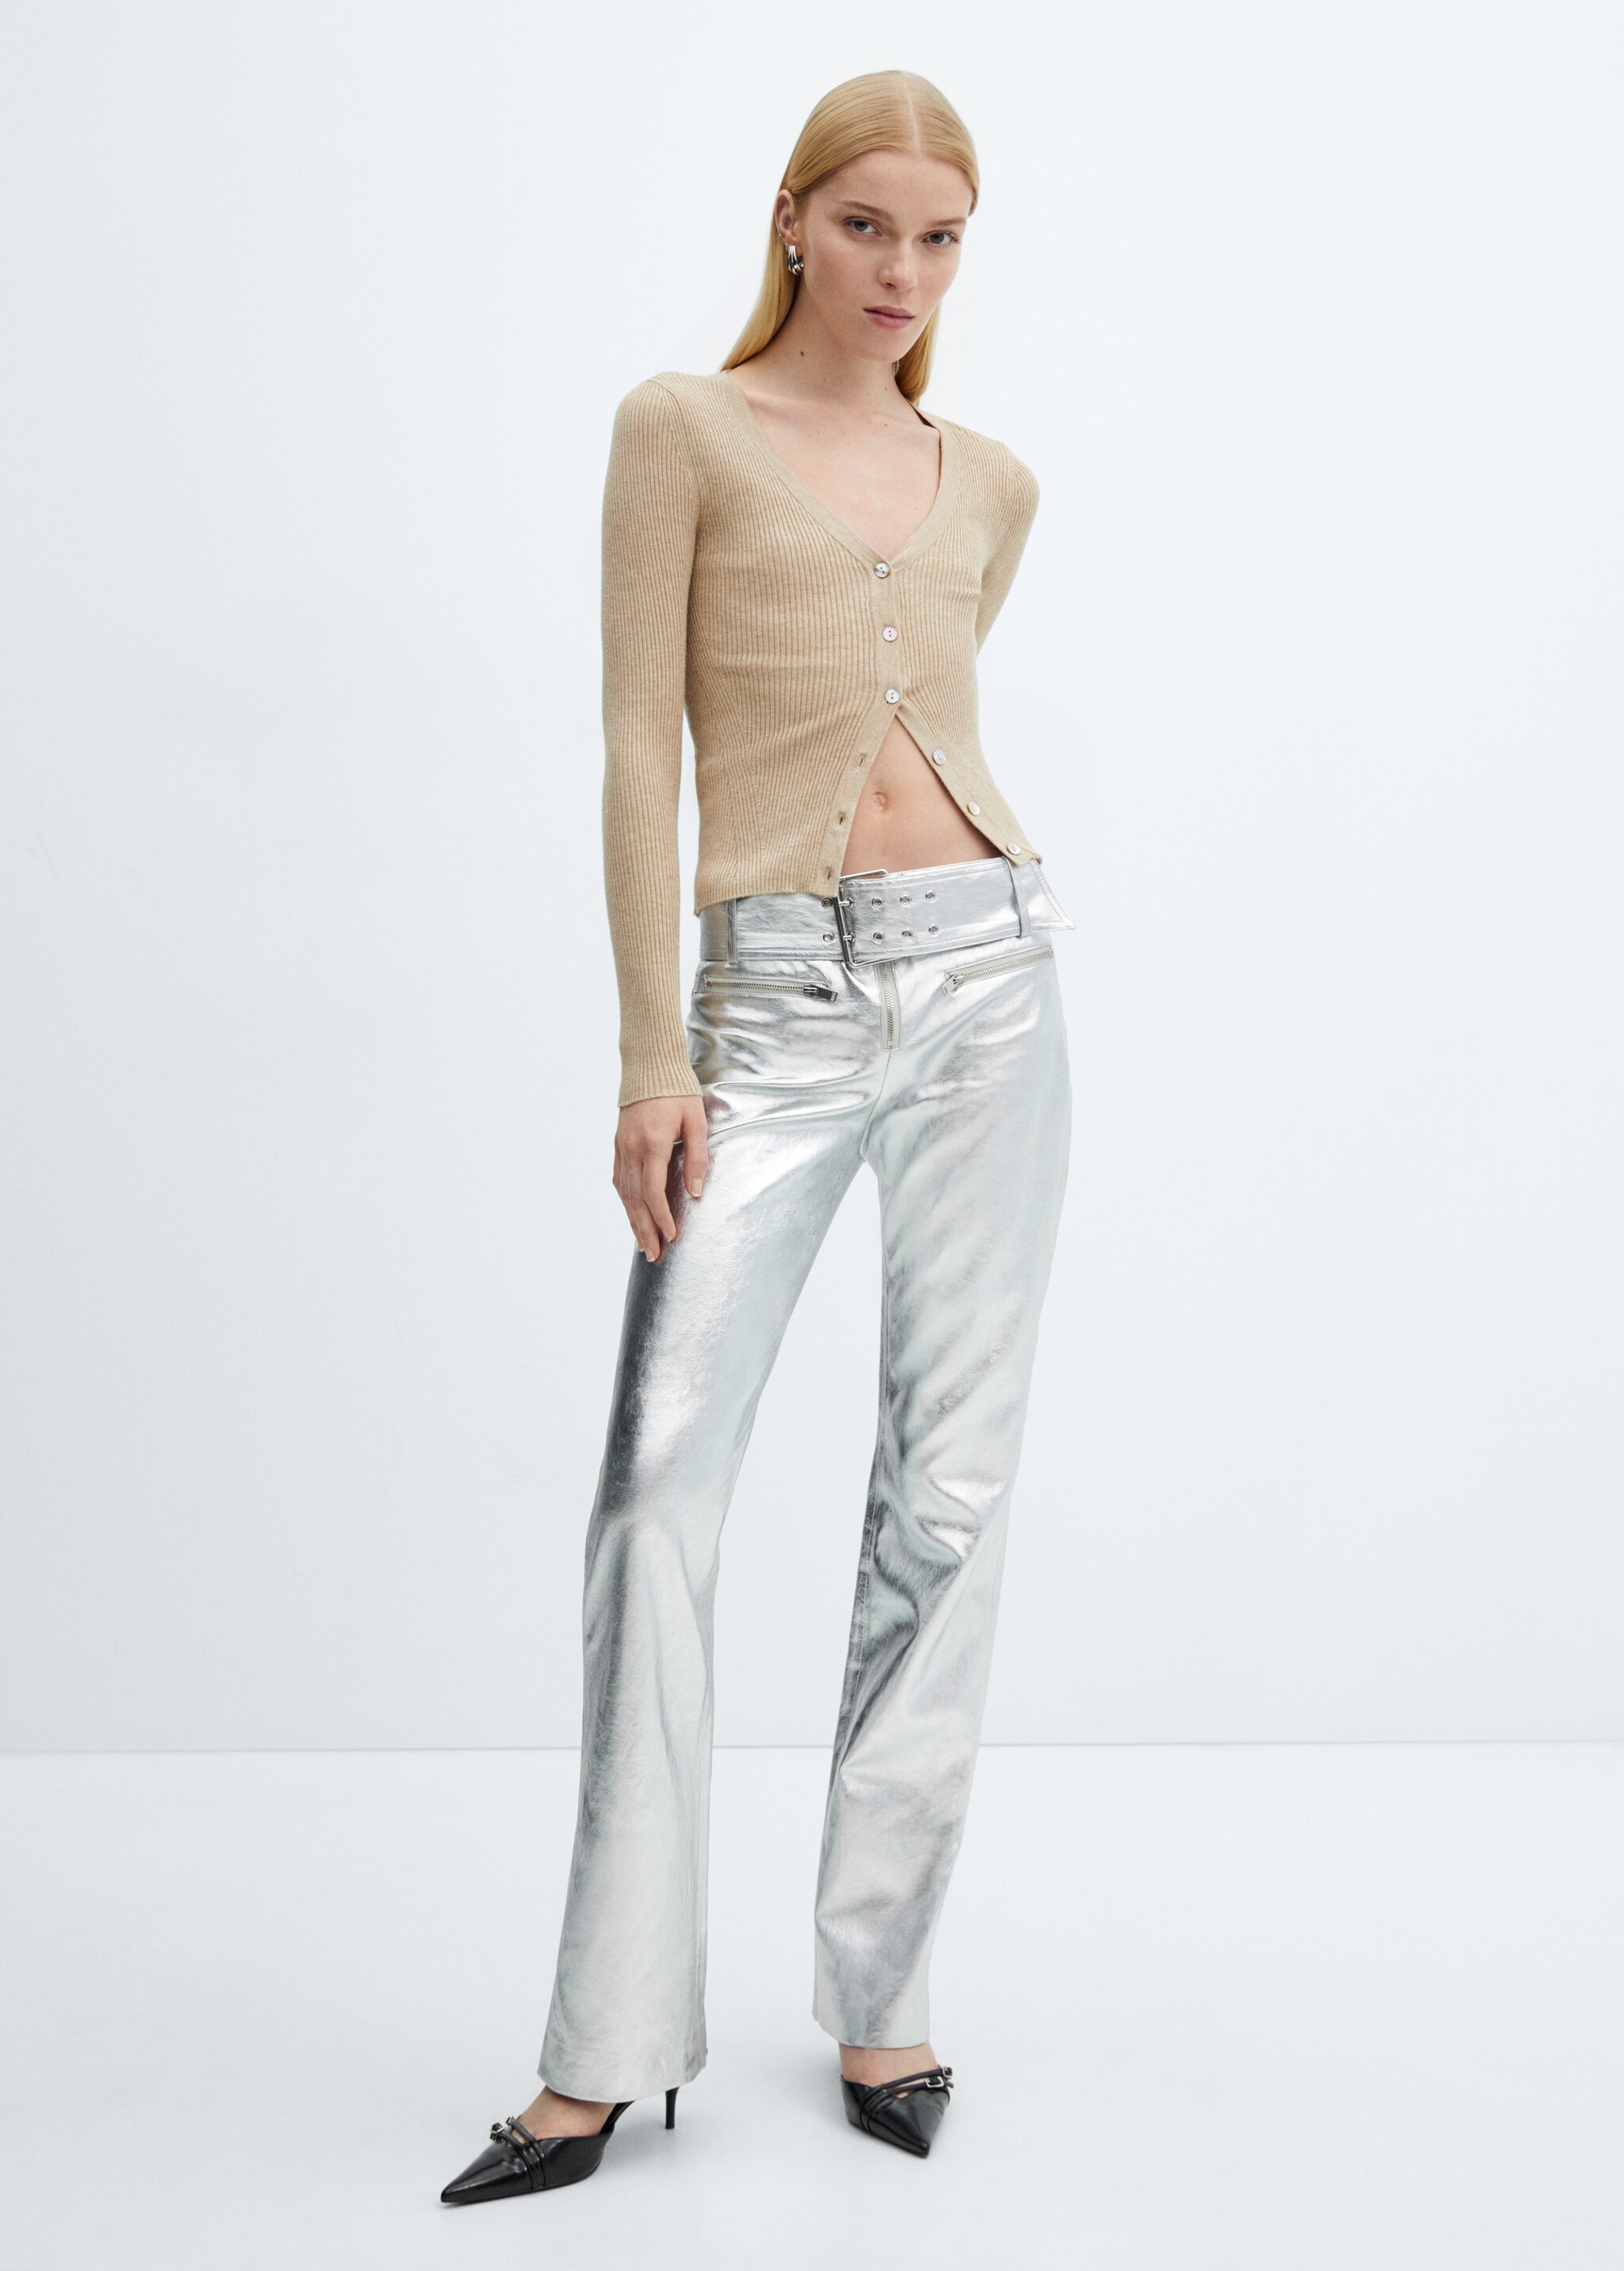 Metallic trousers with belt  - General plane